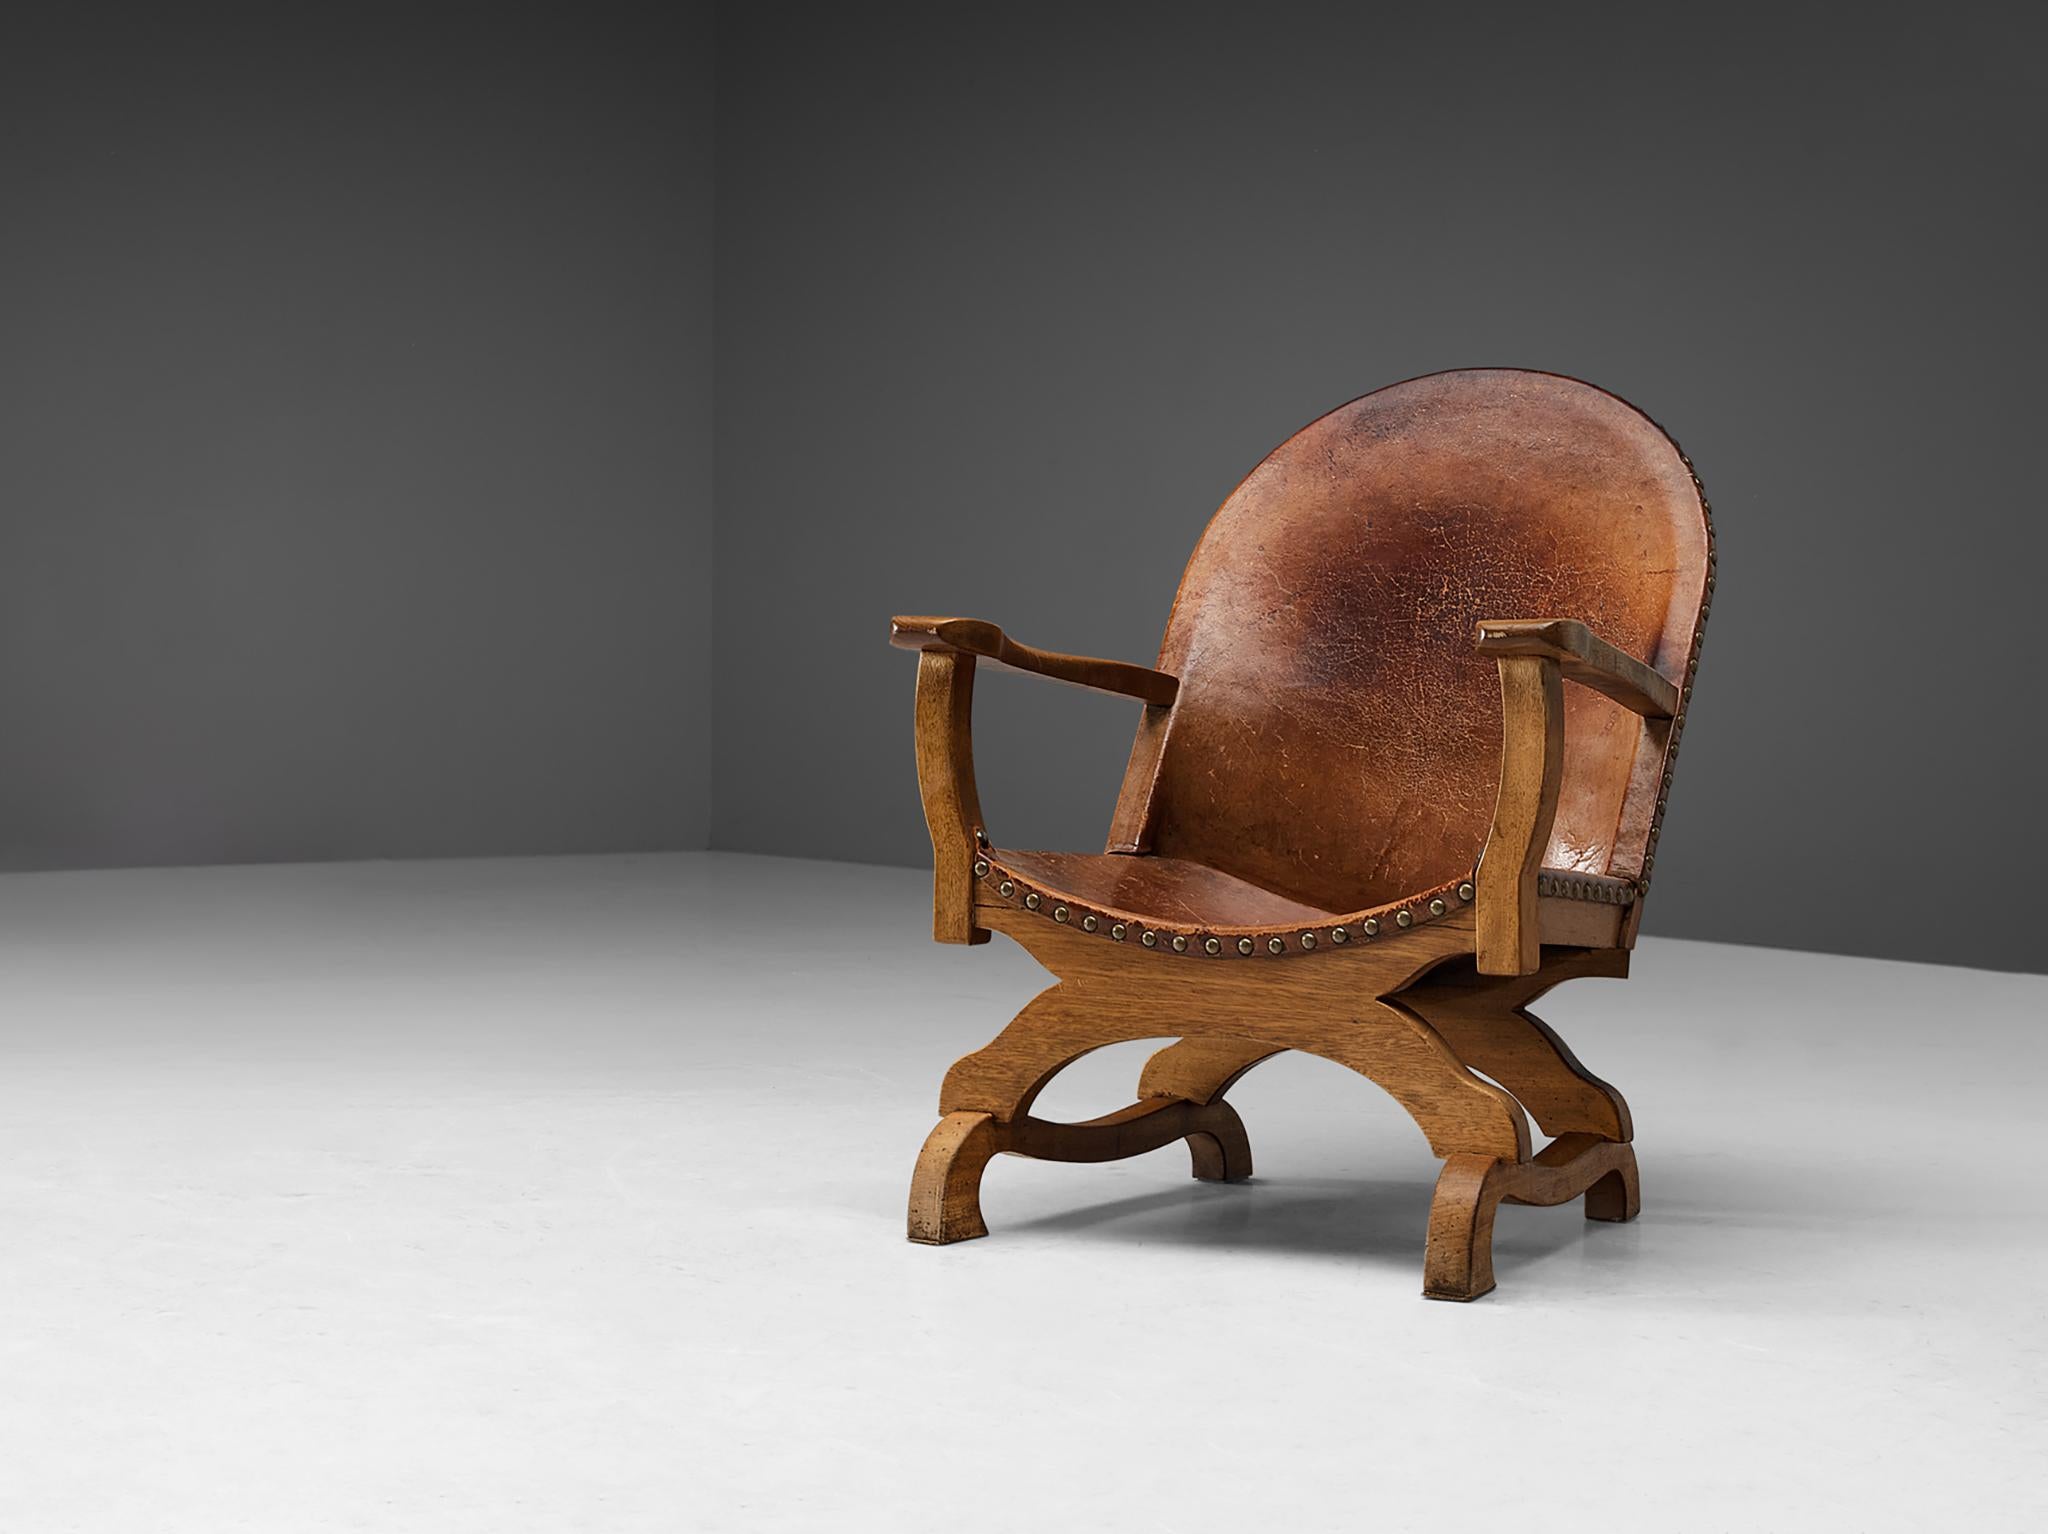 Lounge chair, leather, brass, oak, Spain, 1960s.

This lounge chair originates from Spain and stylistically refer to the late 19th century Revival period. The construction of the base resembles the chair known in Spanish as 